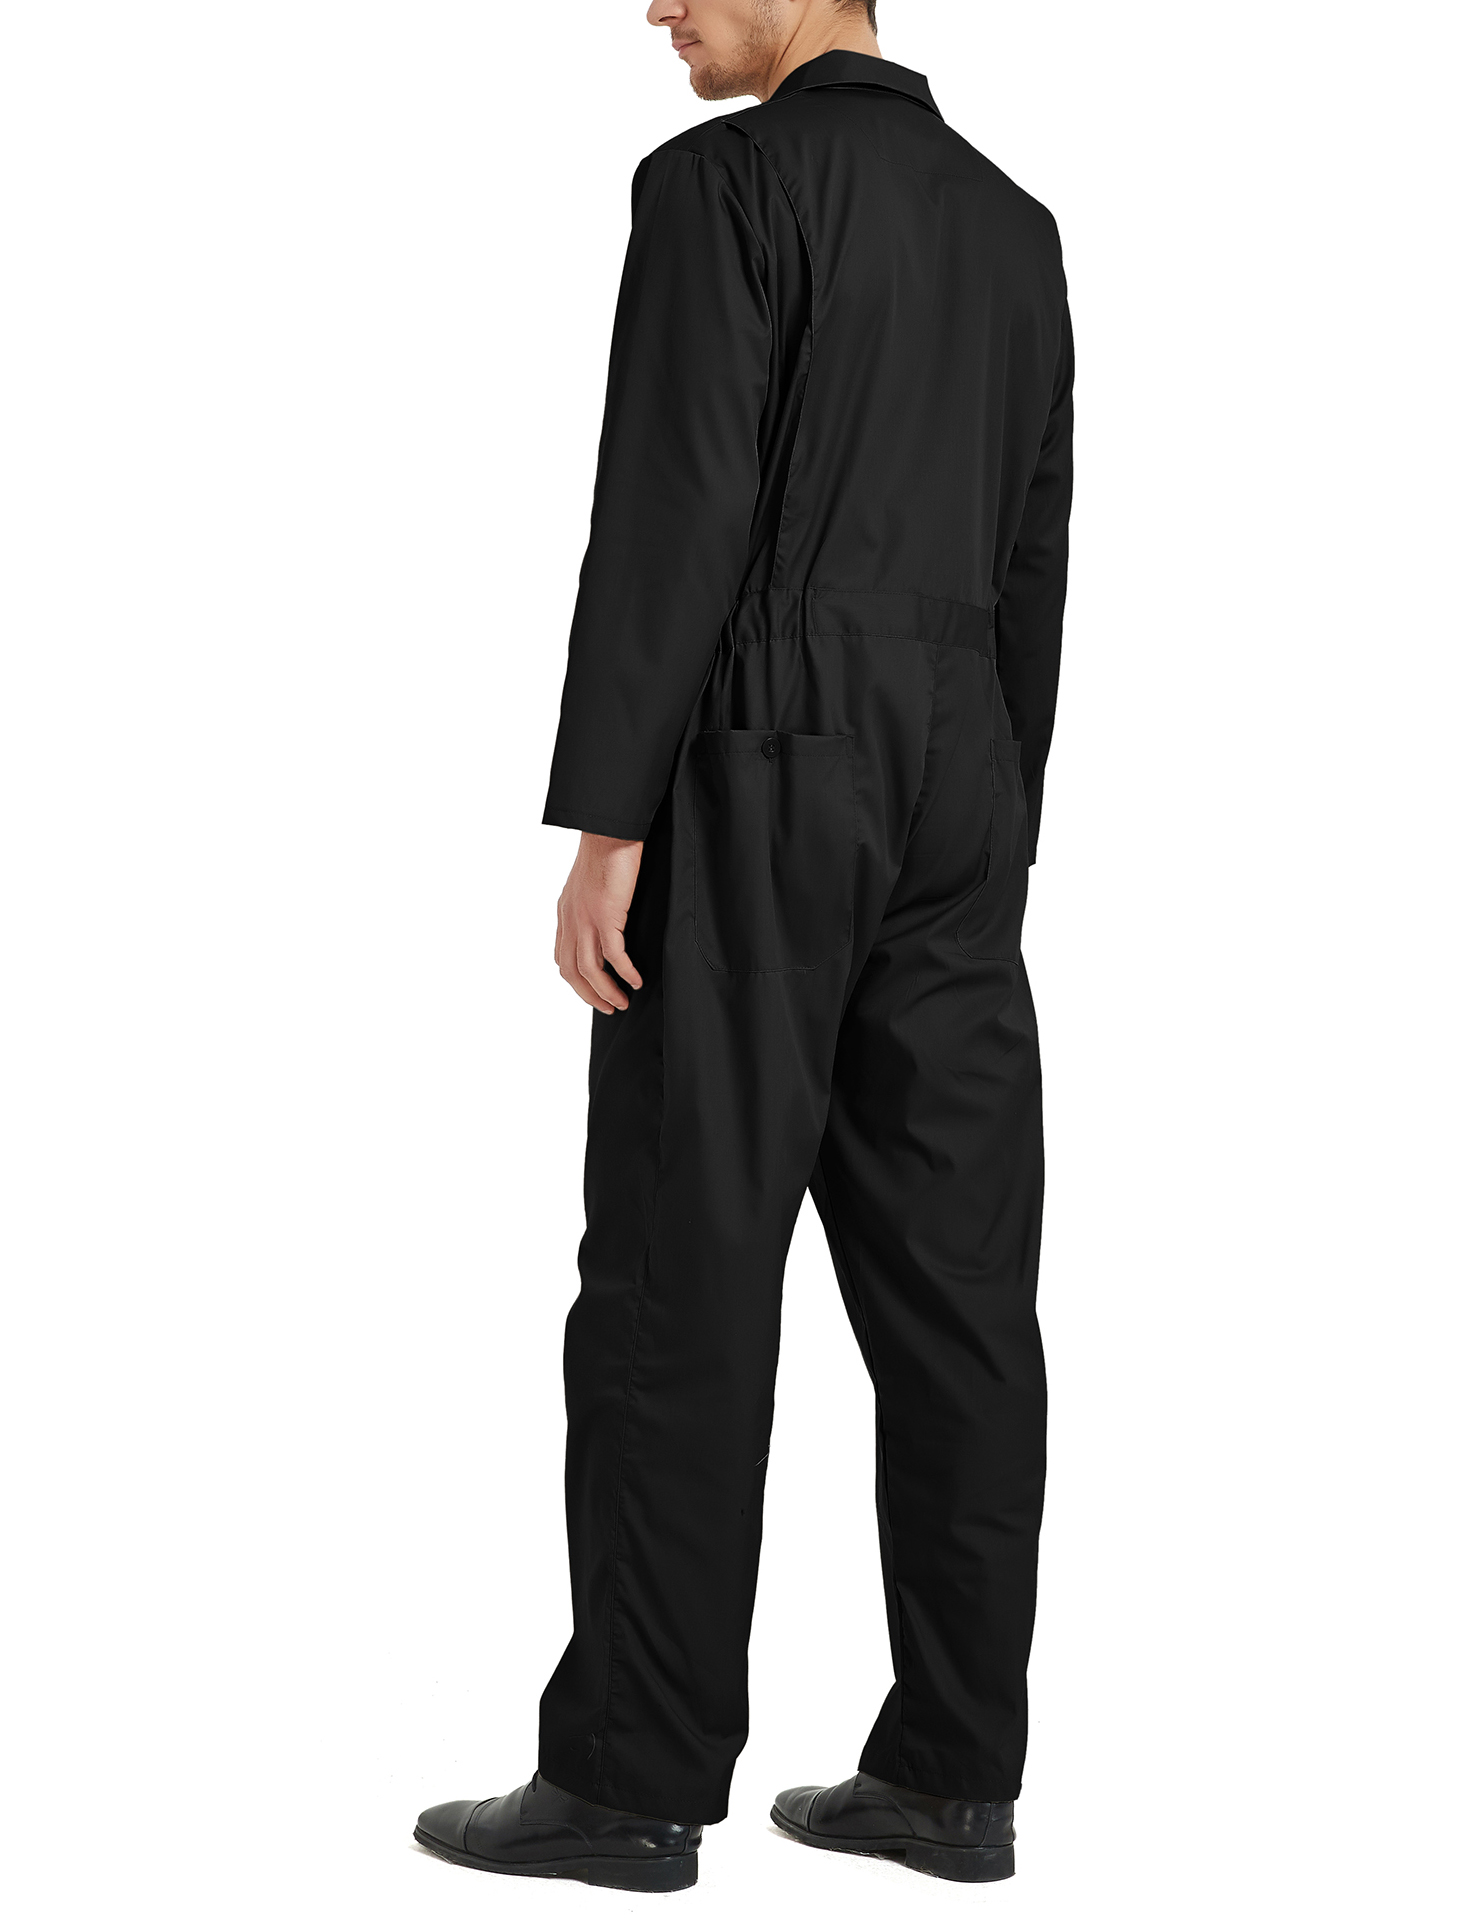 TOPTIE Men's Long Sleeve Coverall, Snap and Zip-Front Coverall Lightweight Coverall